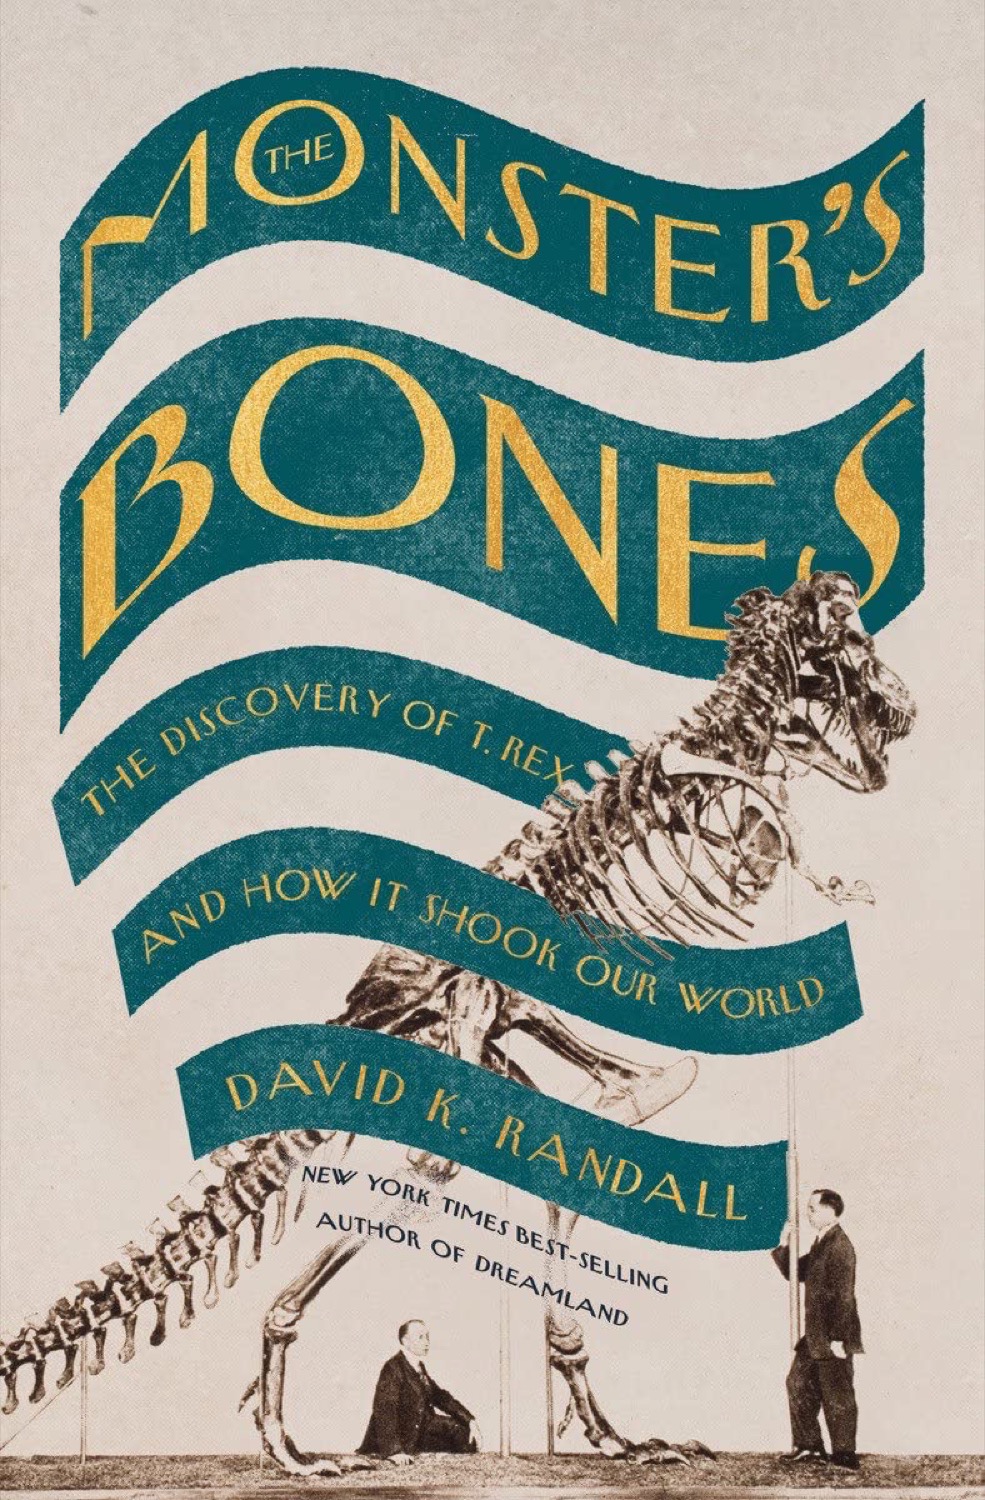 a book cover in the style of an old new yorker magazine cover, with waxy text over an old timey illustration of a t-rex skeleton with two white men and suits below it with text 'The Monster’s Bones: The Discovery of T-Rex and How It Shook Our World by David K. Randall'